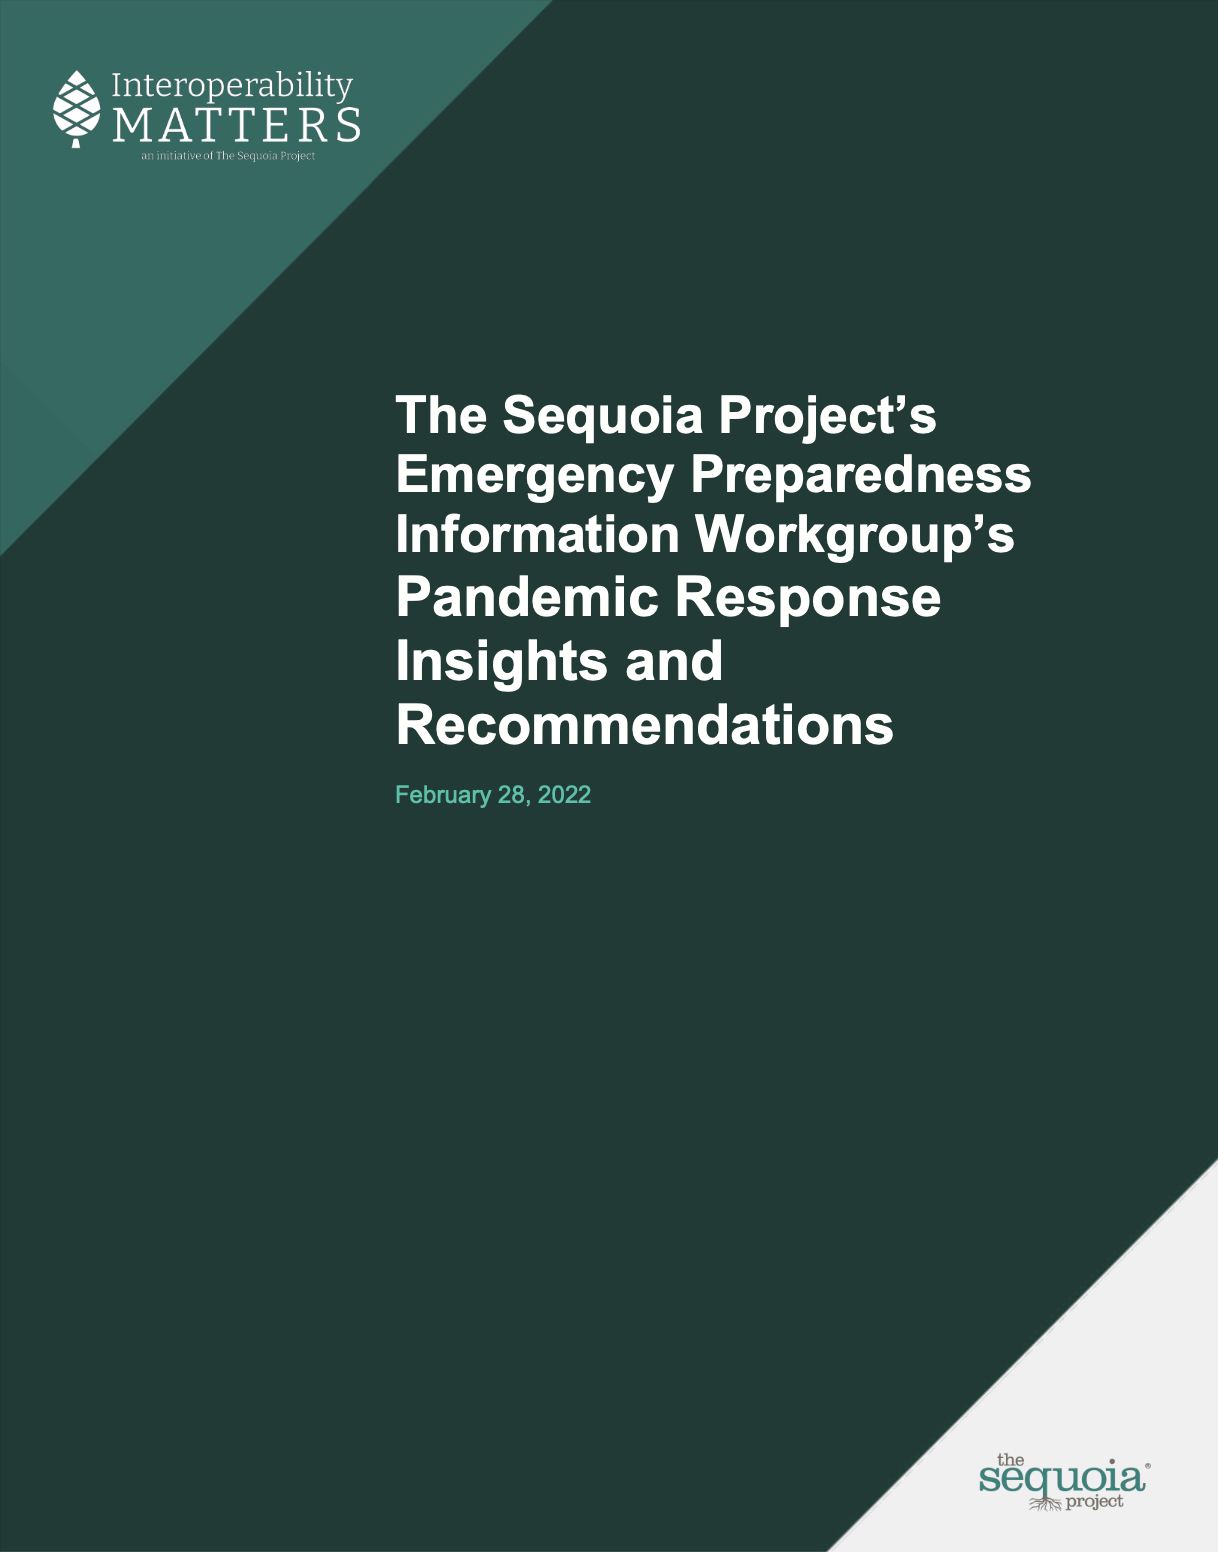 Sequoia Releases a Useful Workgroup Report on Information and Pandemic Response